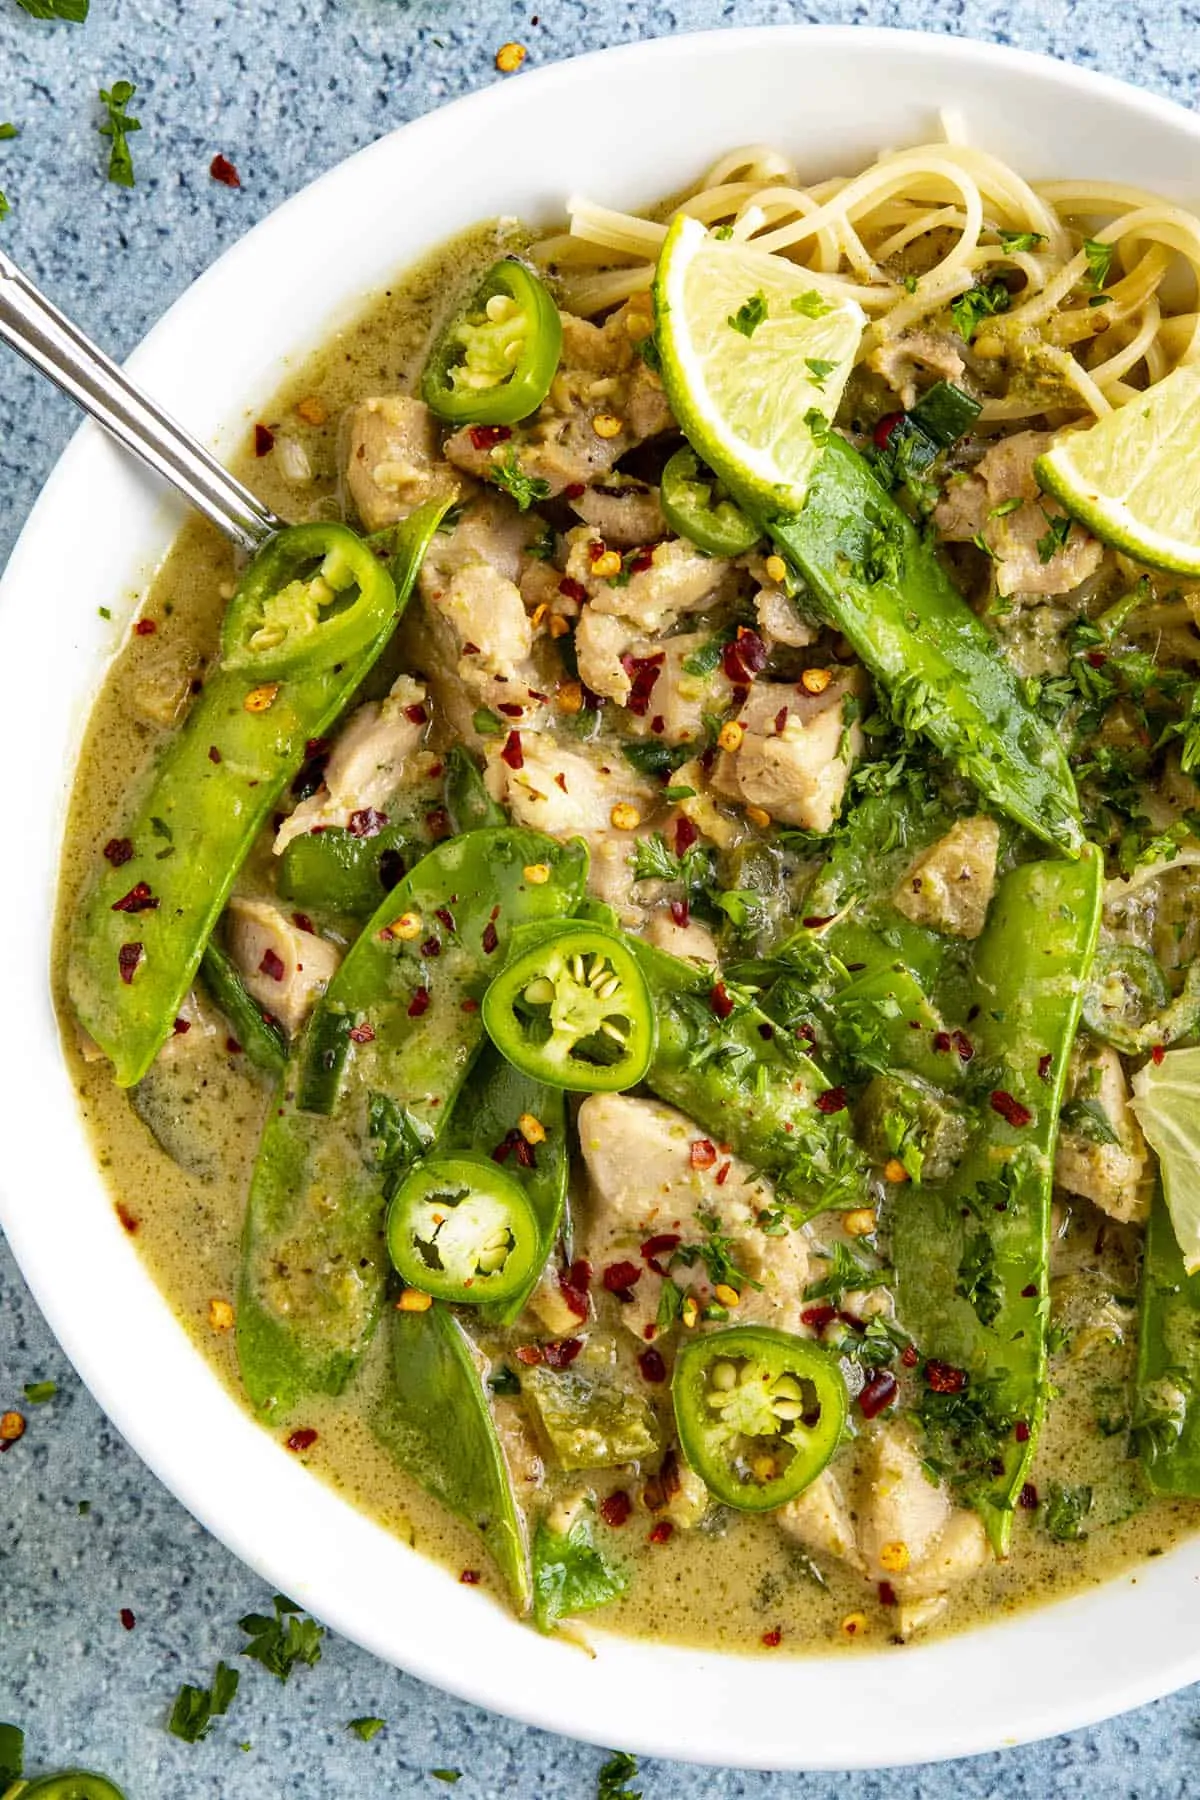 Spicy green curry in a bowl, ready to serve.